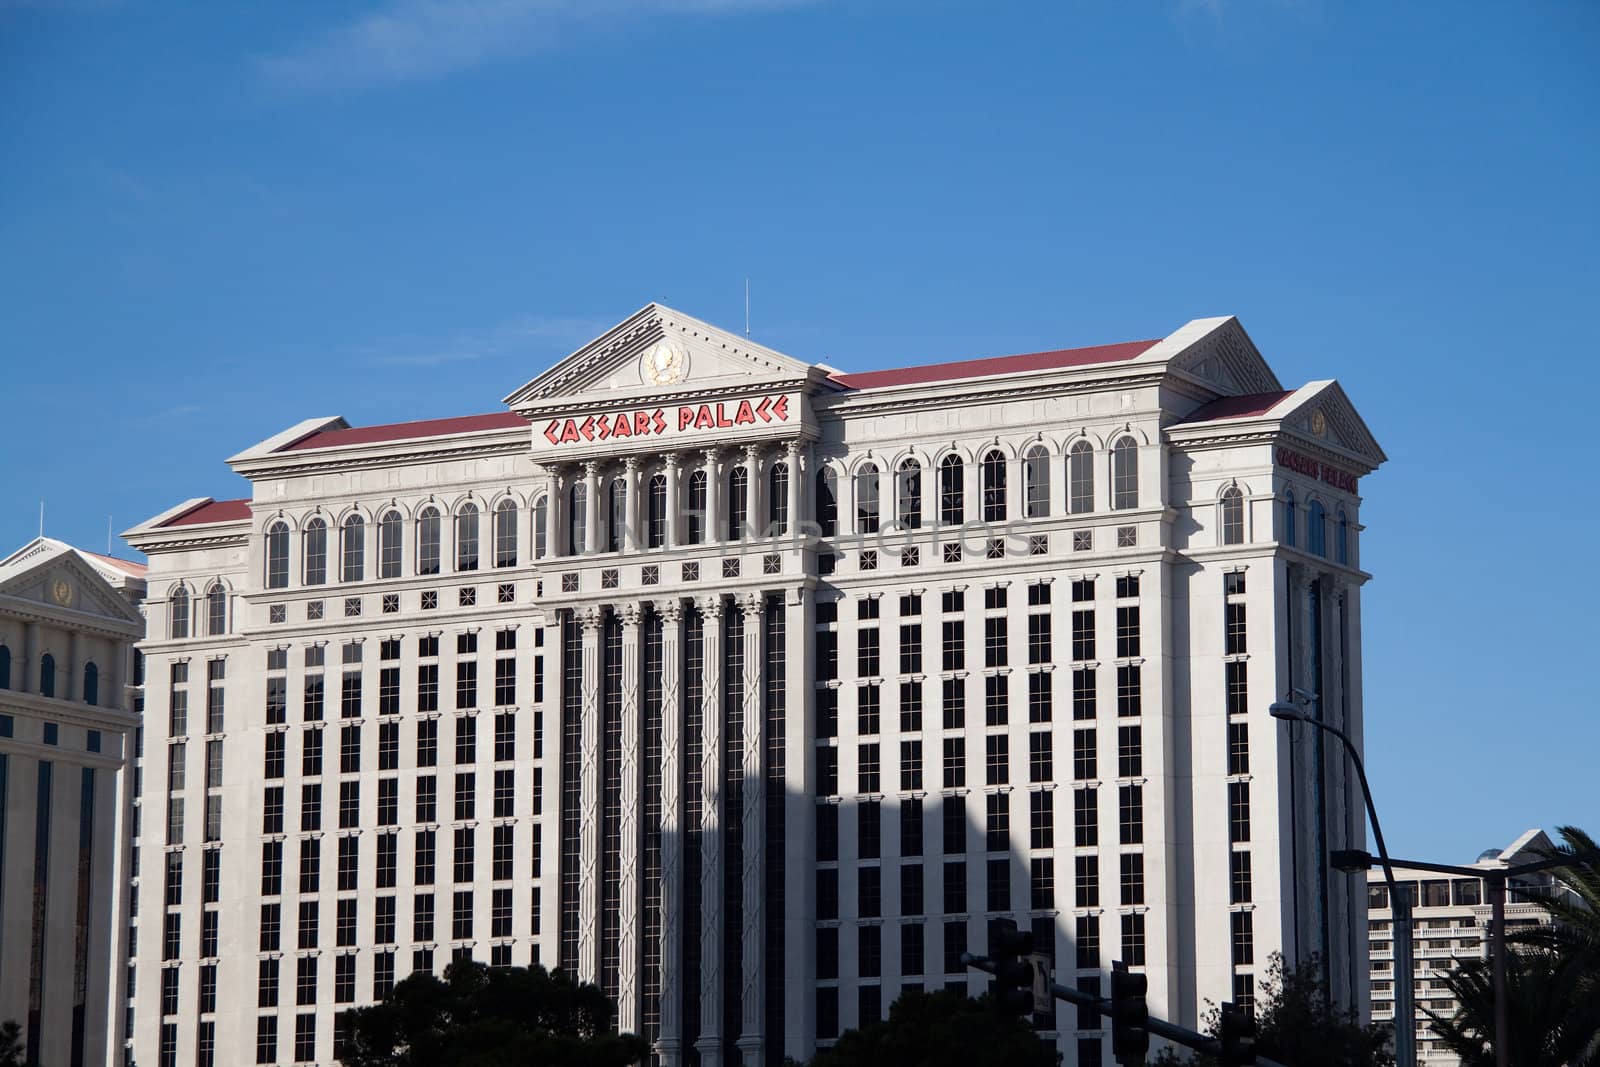 December 30th, 2009 - Las Vegas, Nevada, USA - One of the hotel room towers of Ceasers Palace Hotel and Casino on Las Vegas boulevard